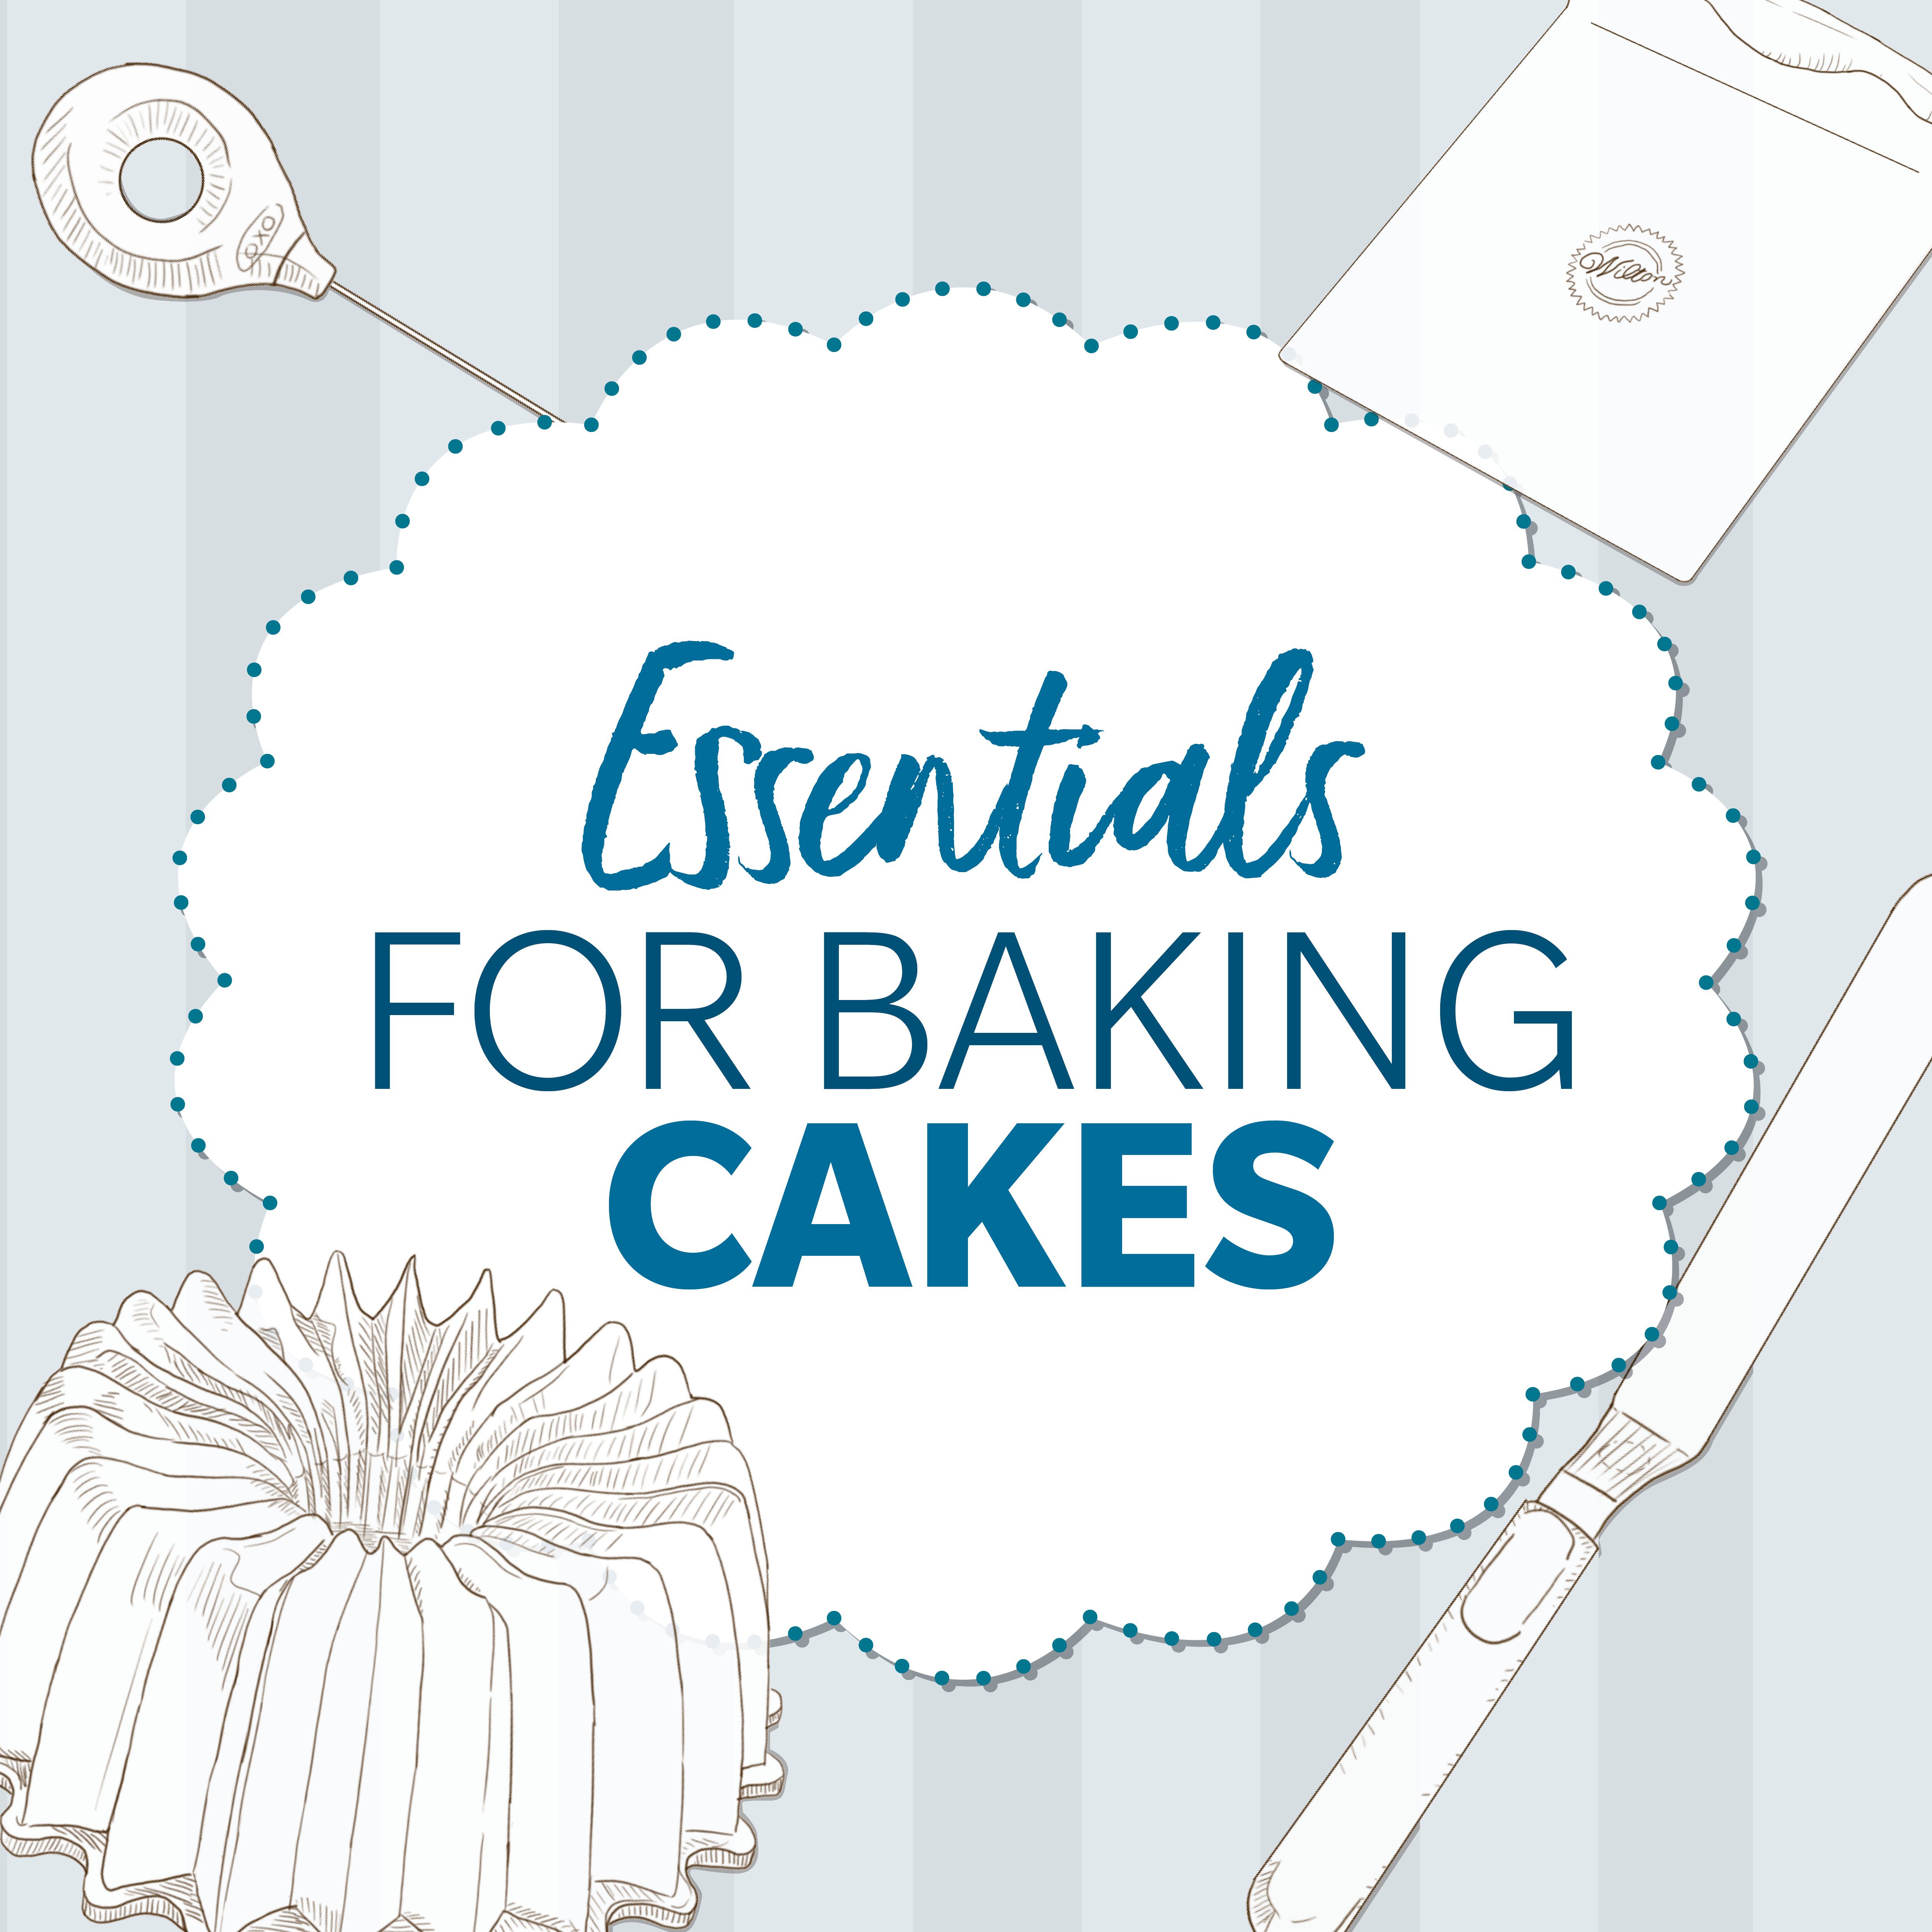 My Top 6 Essential Baking Tools for Every Level Baker - Cake by Courtney